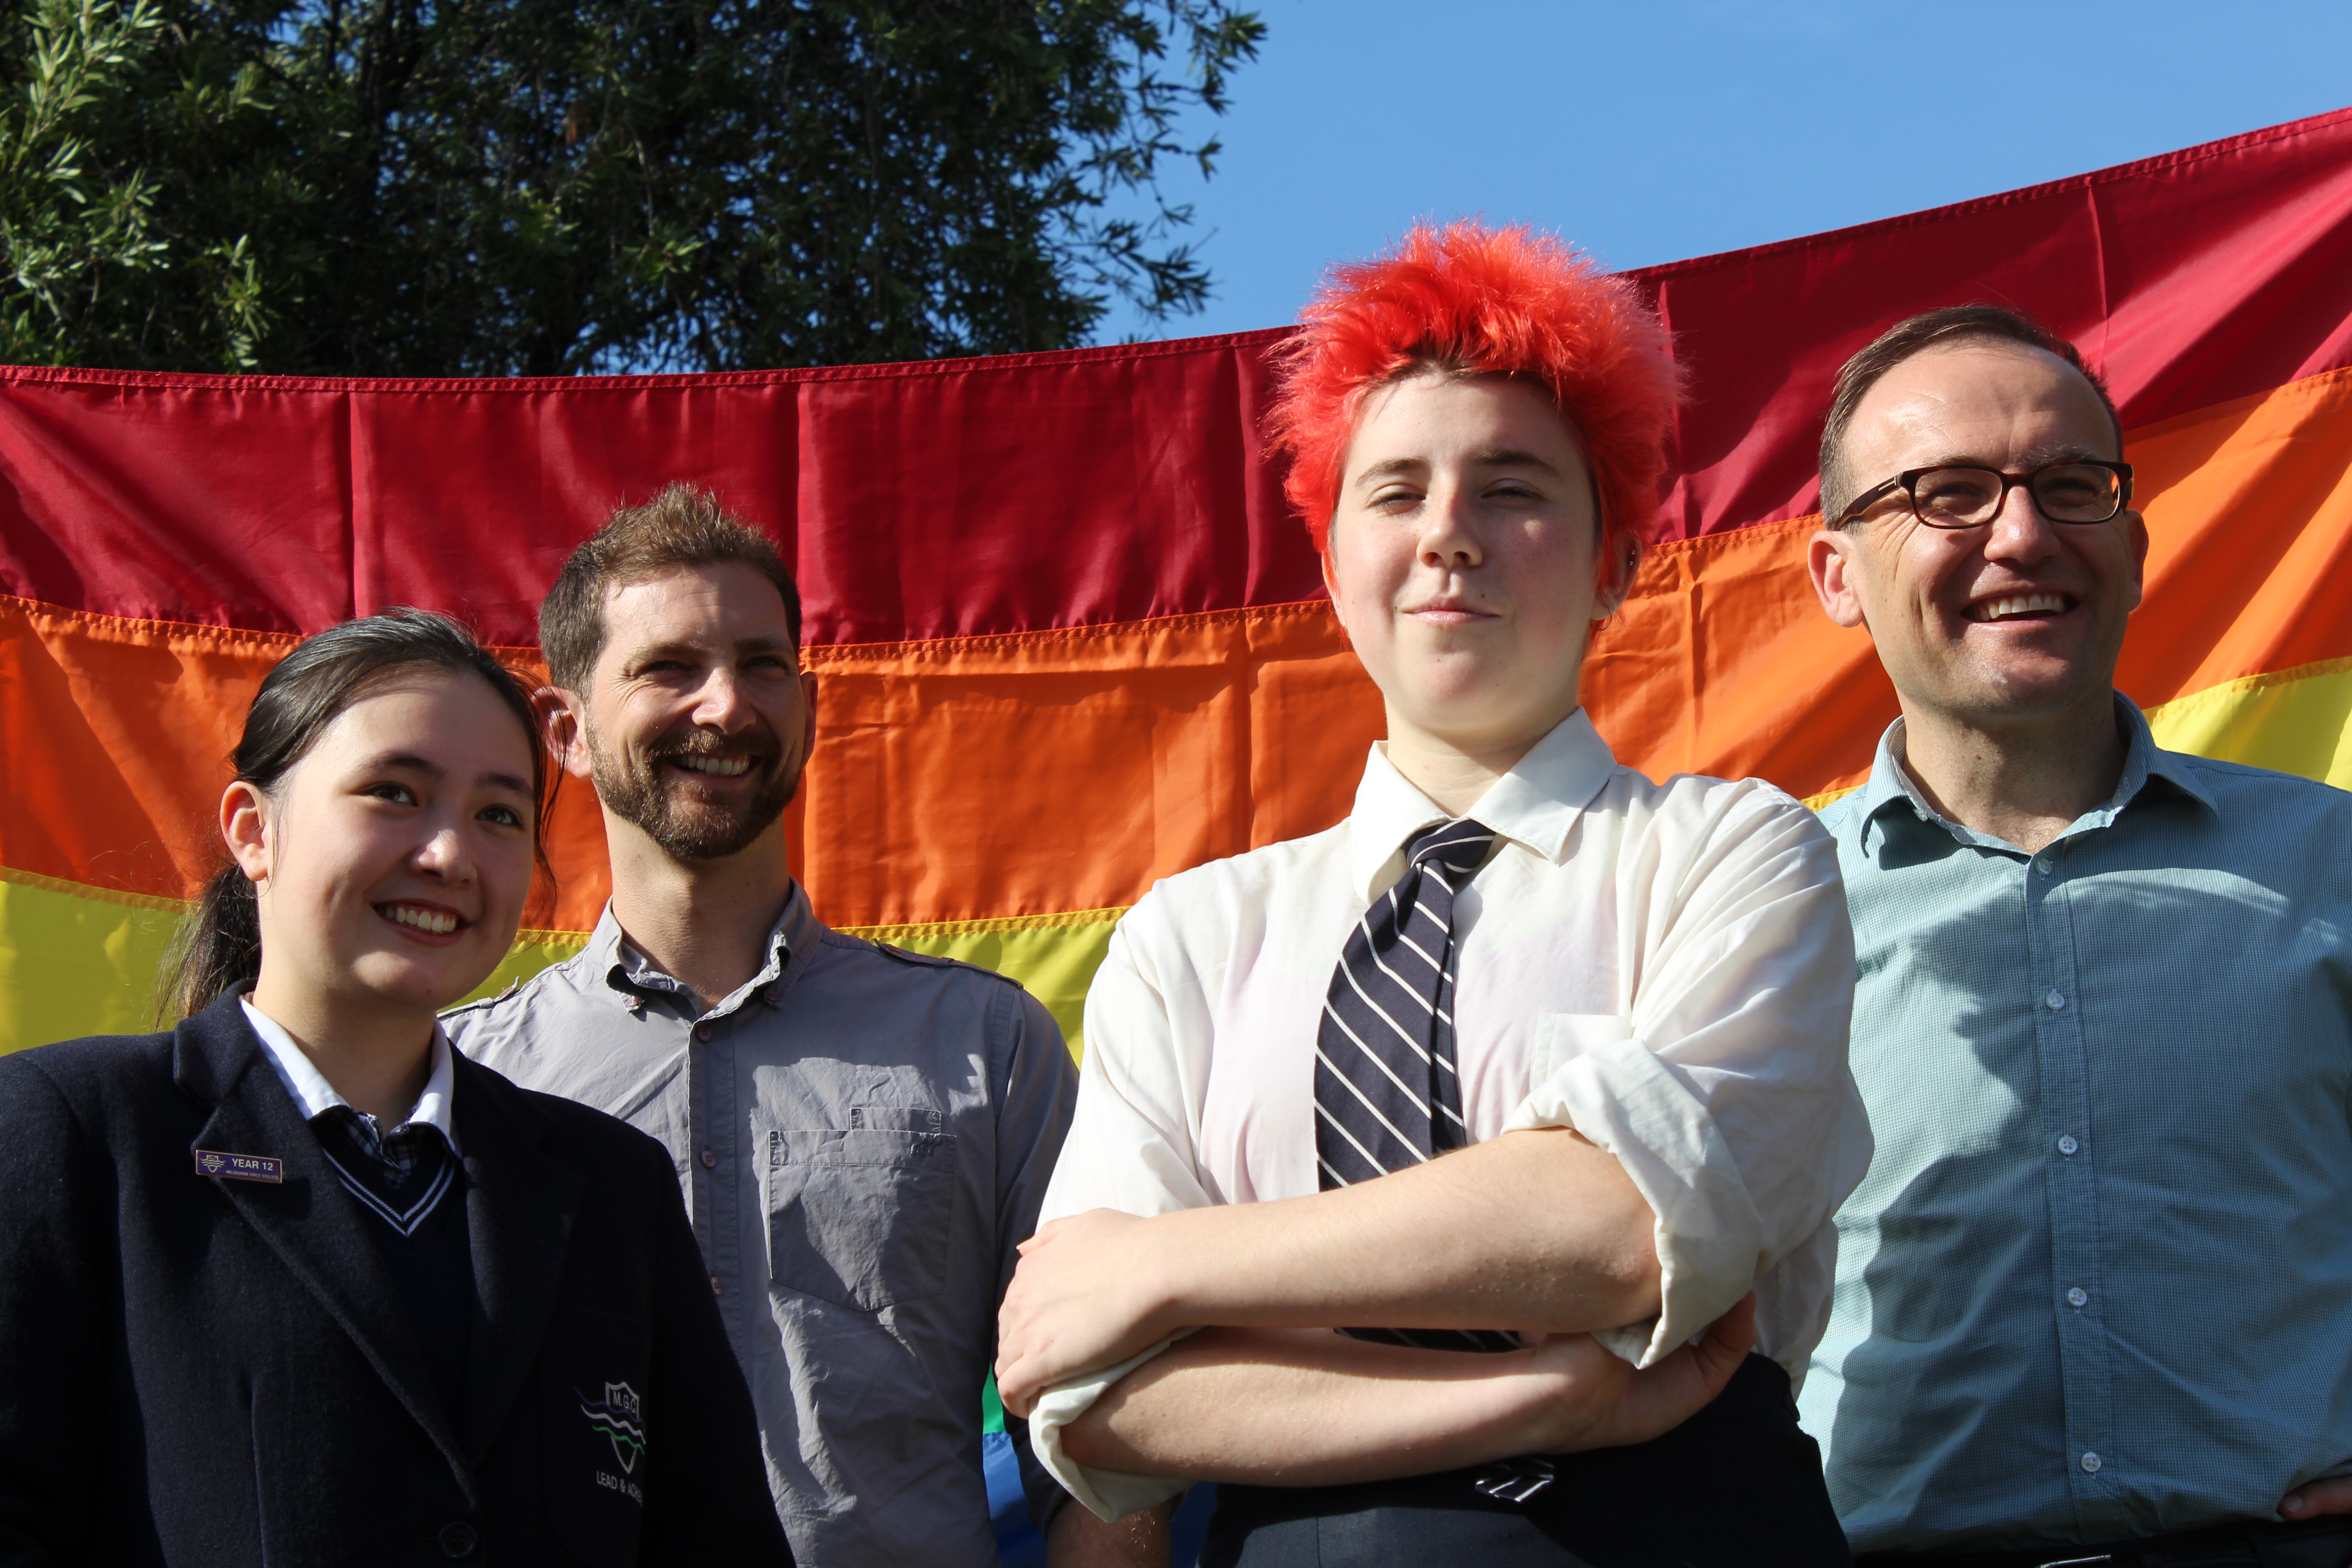 Safe Schools furore prompts Melbourne high school to fly rainbow flag for LGBTI students